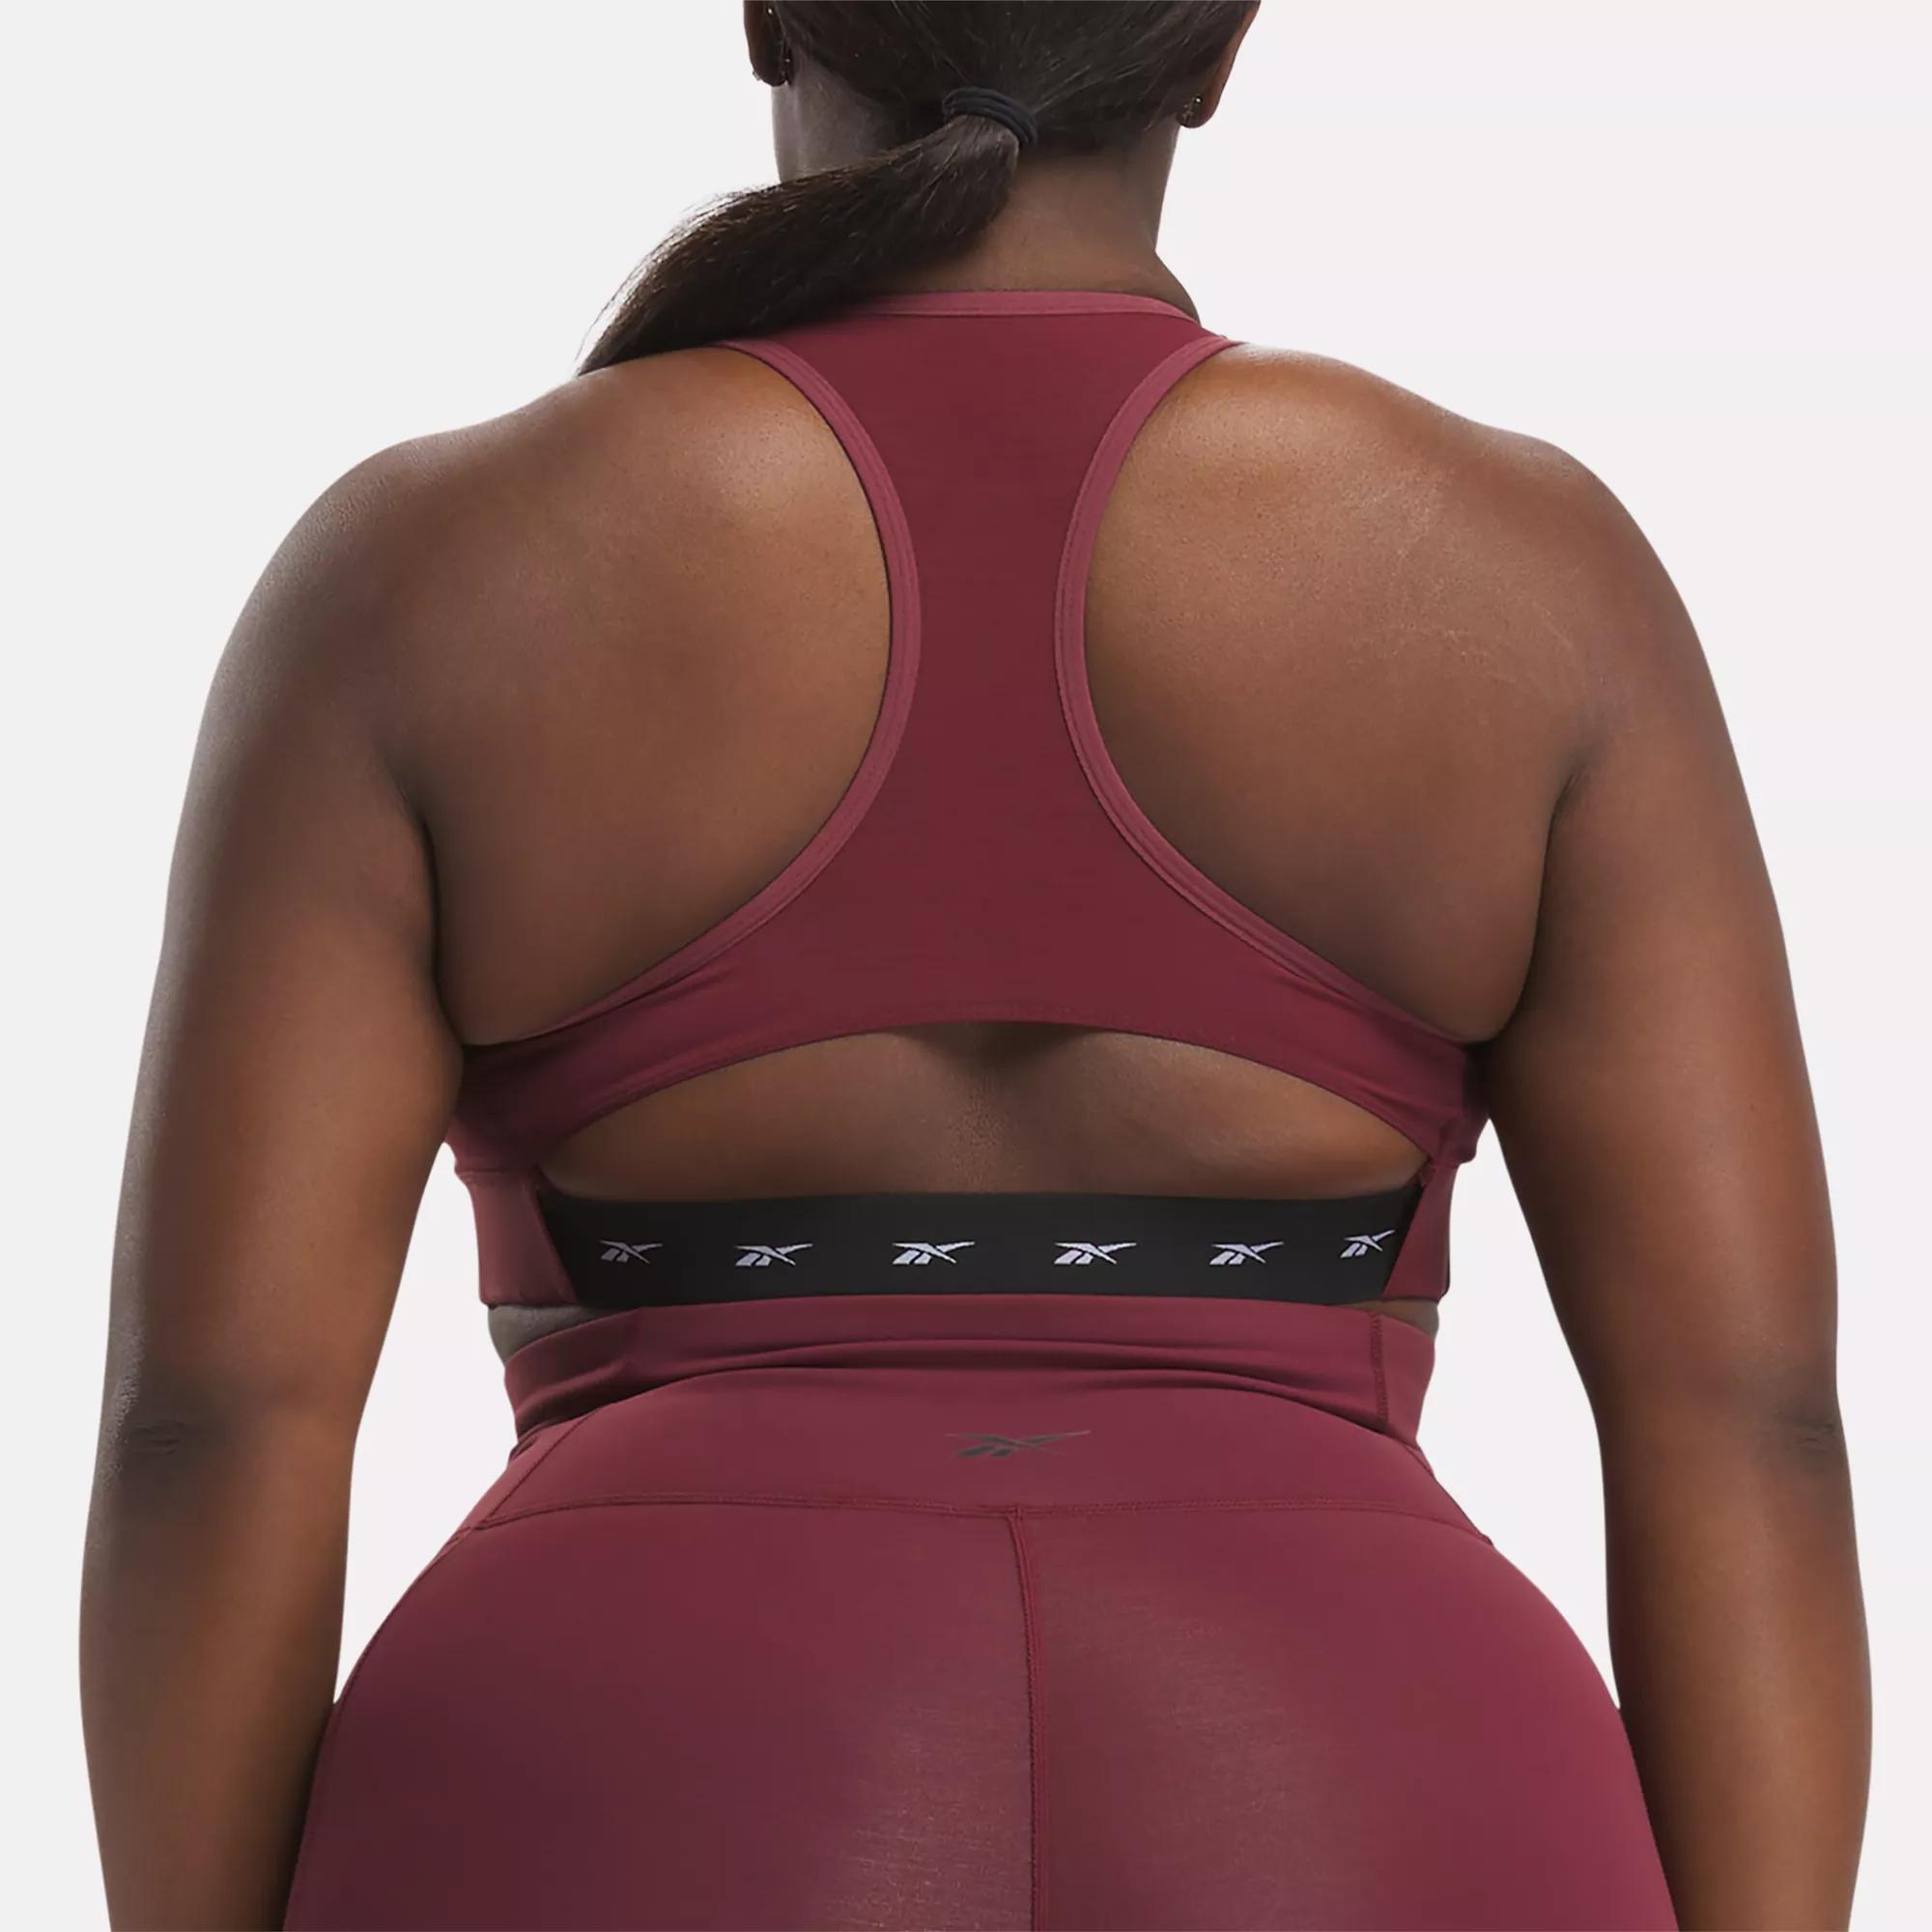 All In Motion Sport Bra XXL Bralette Racerback Athletic Work Out Burgundy  Tank - $16 New With Tags - From Alexis